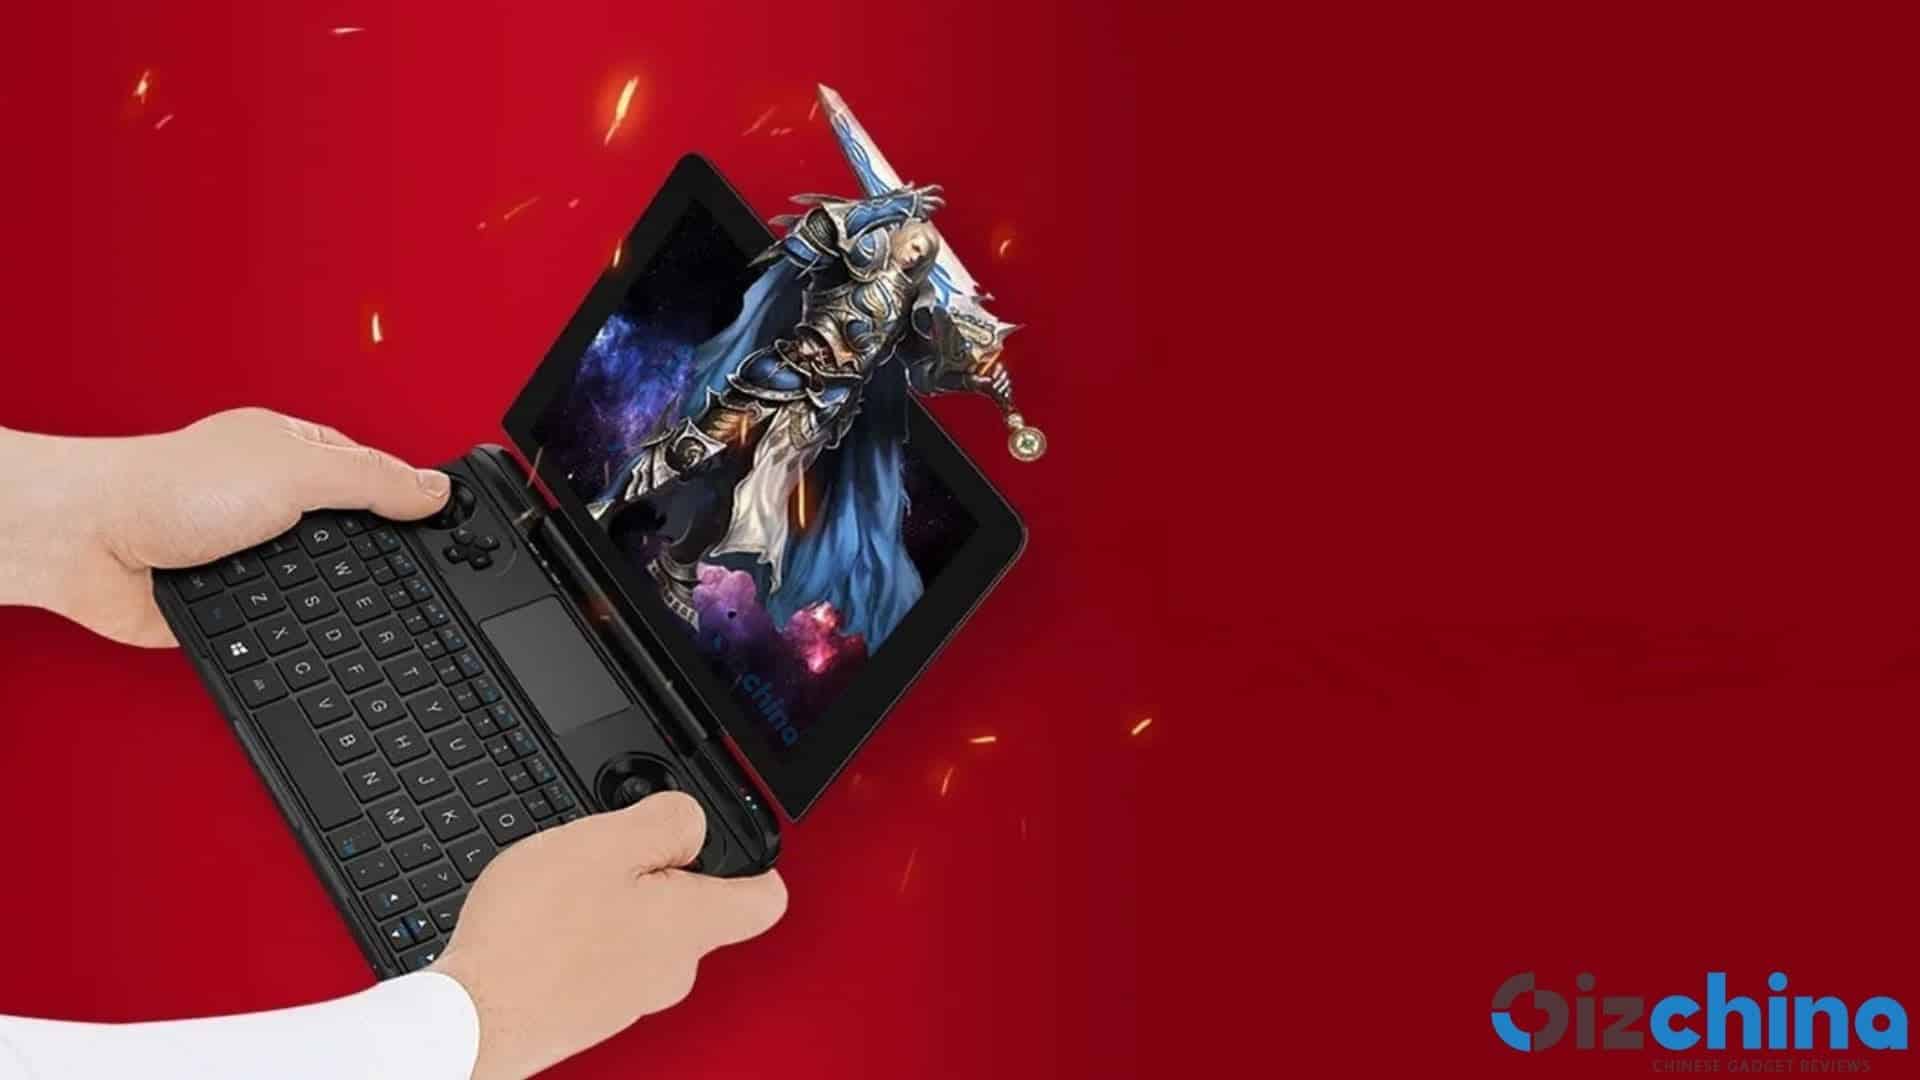 GPD WIN Max is the Smallest “Handheld Gaming Laptop” with Intel Core i5-1035G7 CPU